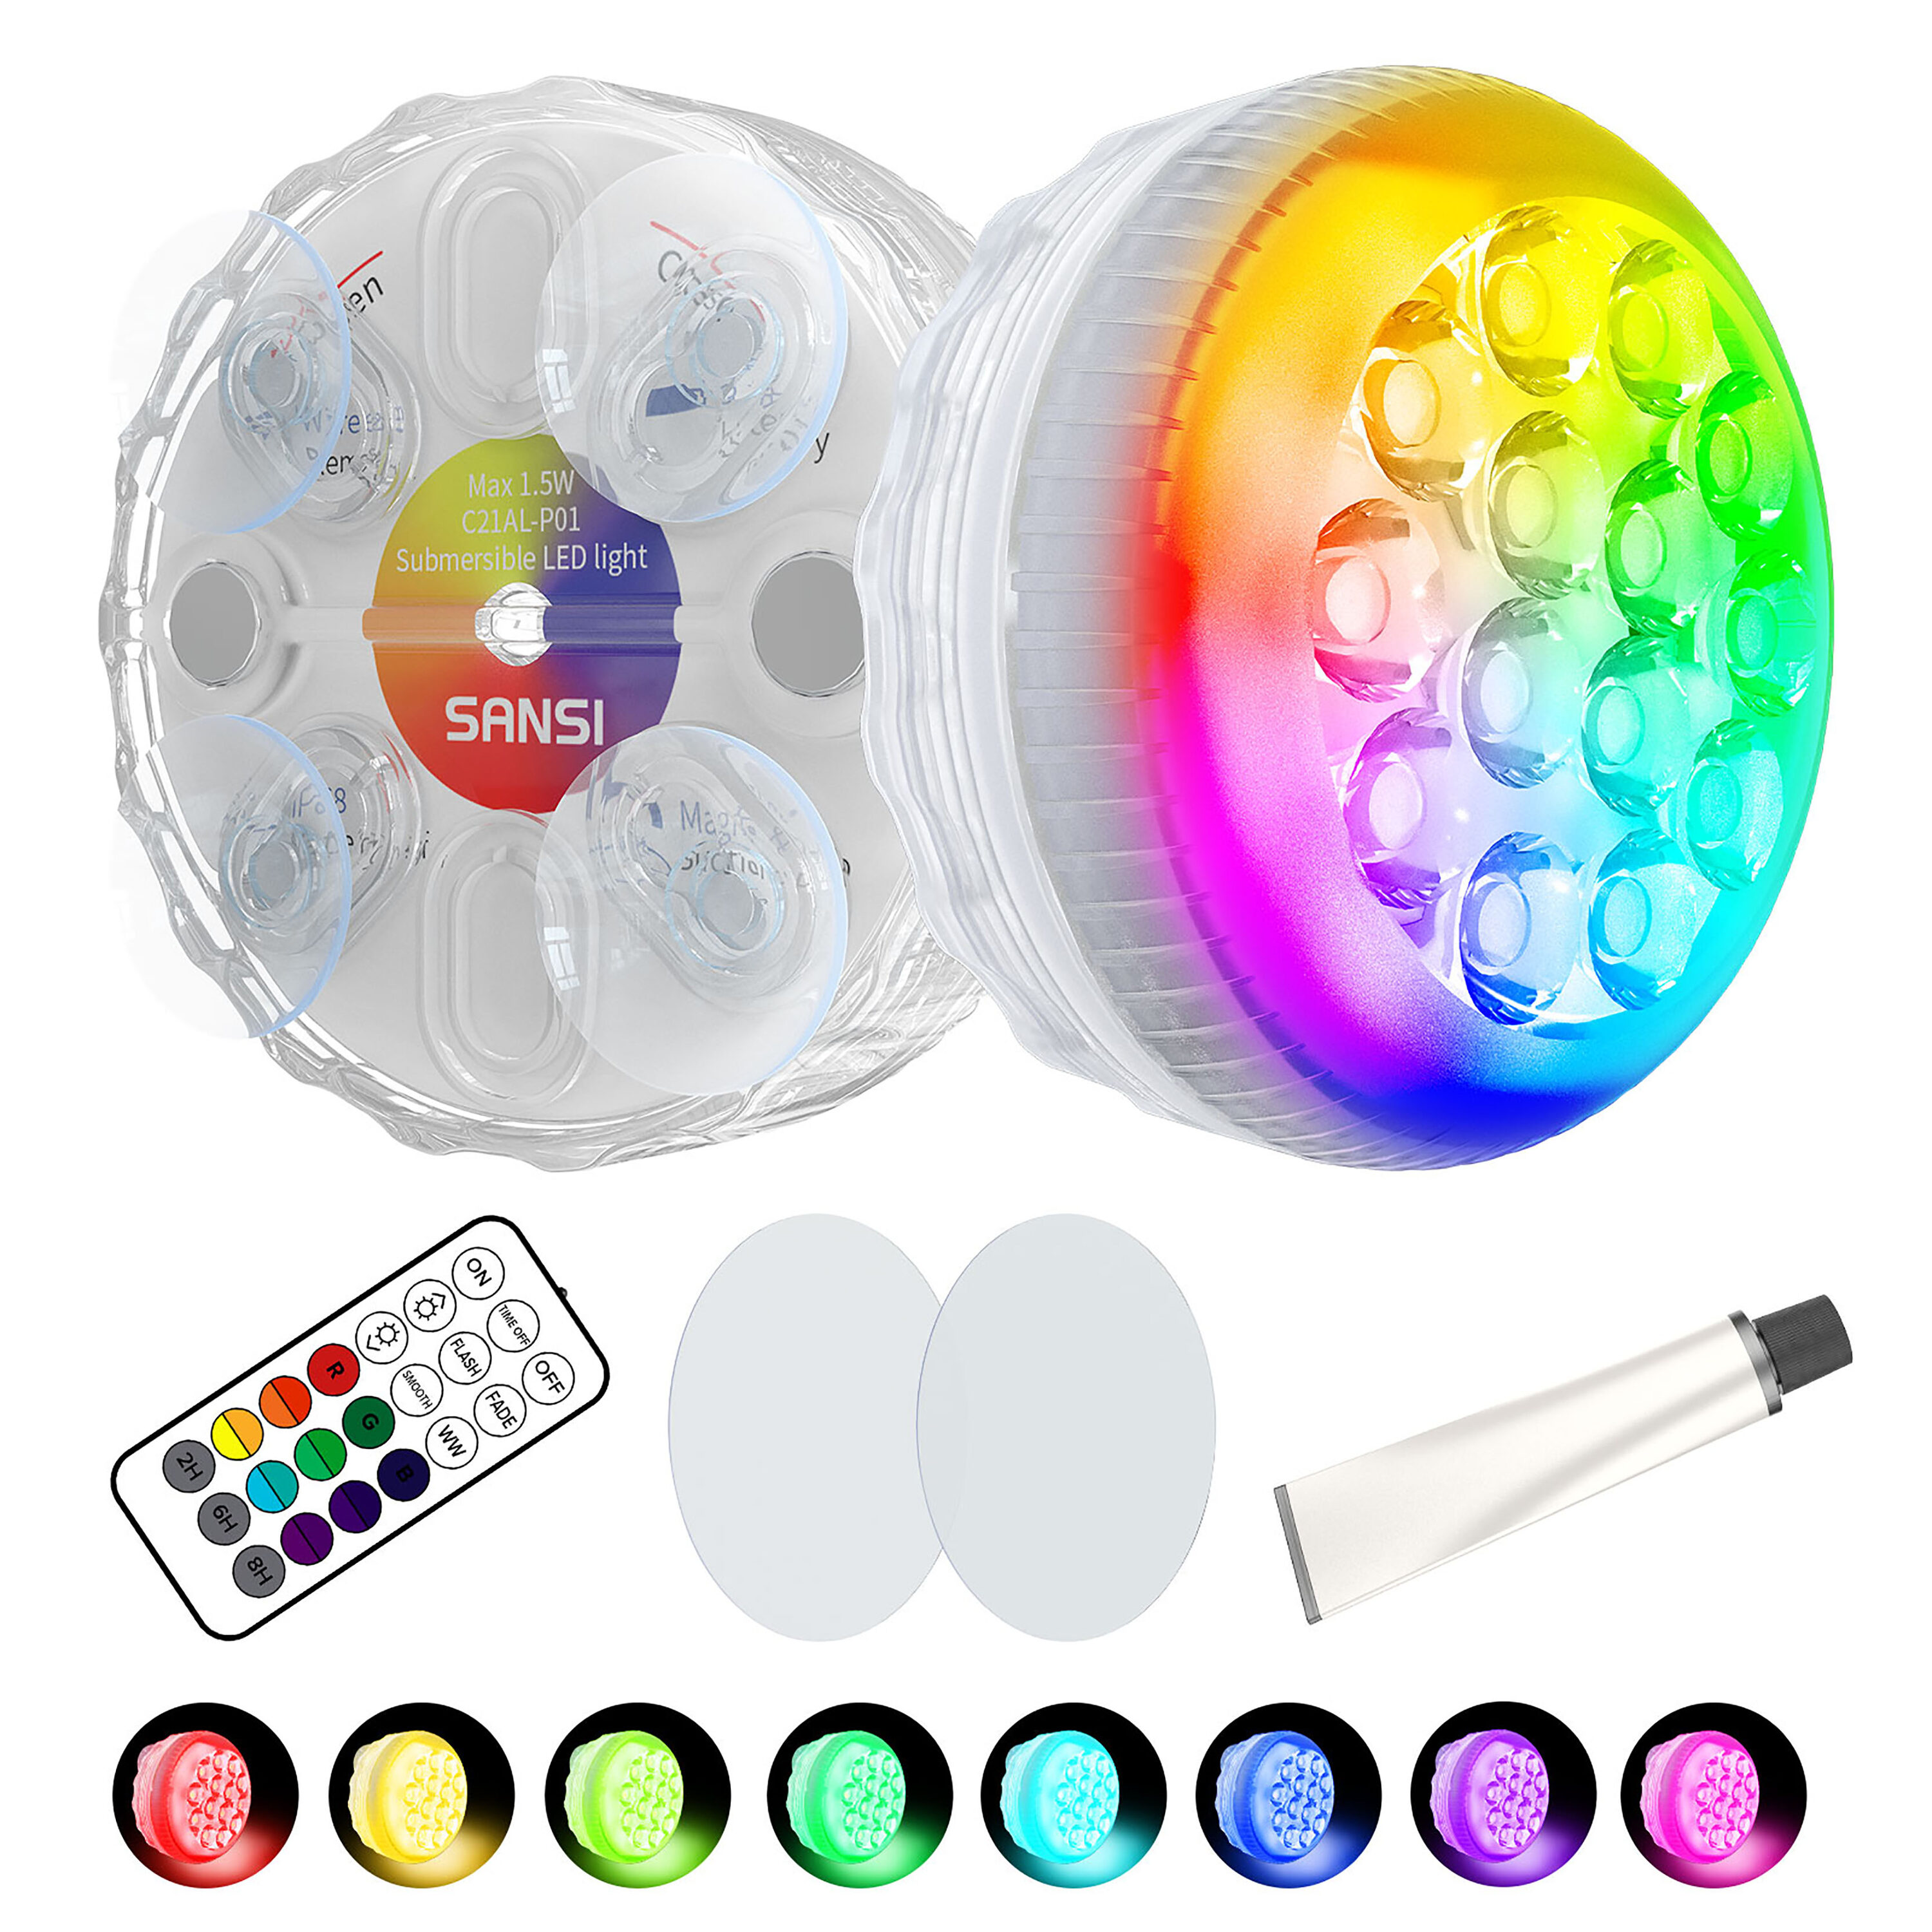 SANSI RGB Pool Lights, Submersible LED Pool Lights with Magnet and Suction Cups, Waterproof IP68 Underwater Pond Lights with 16 Colors RF Remote, Tub